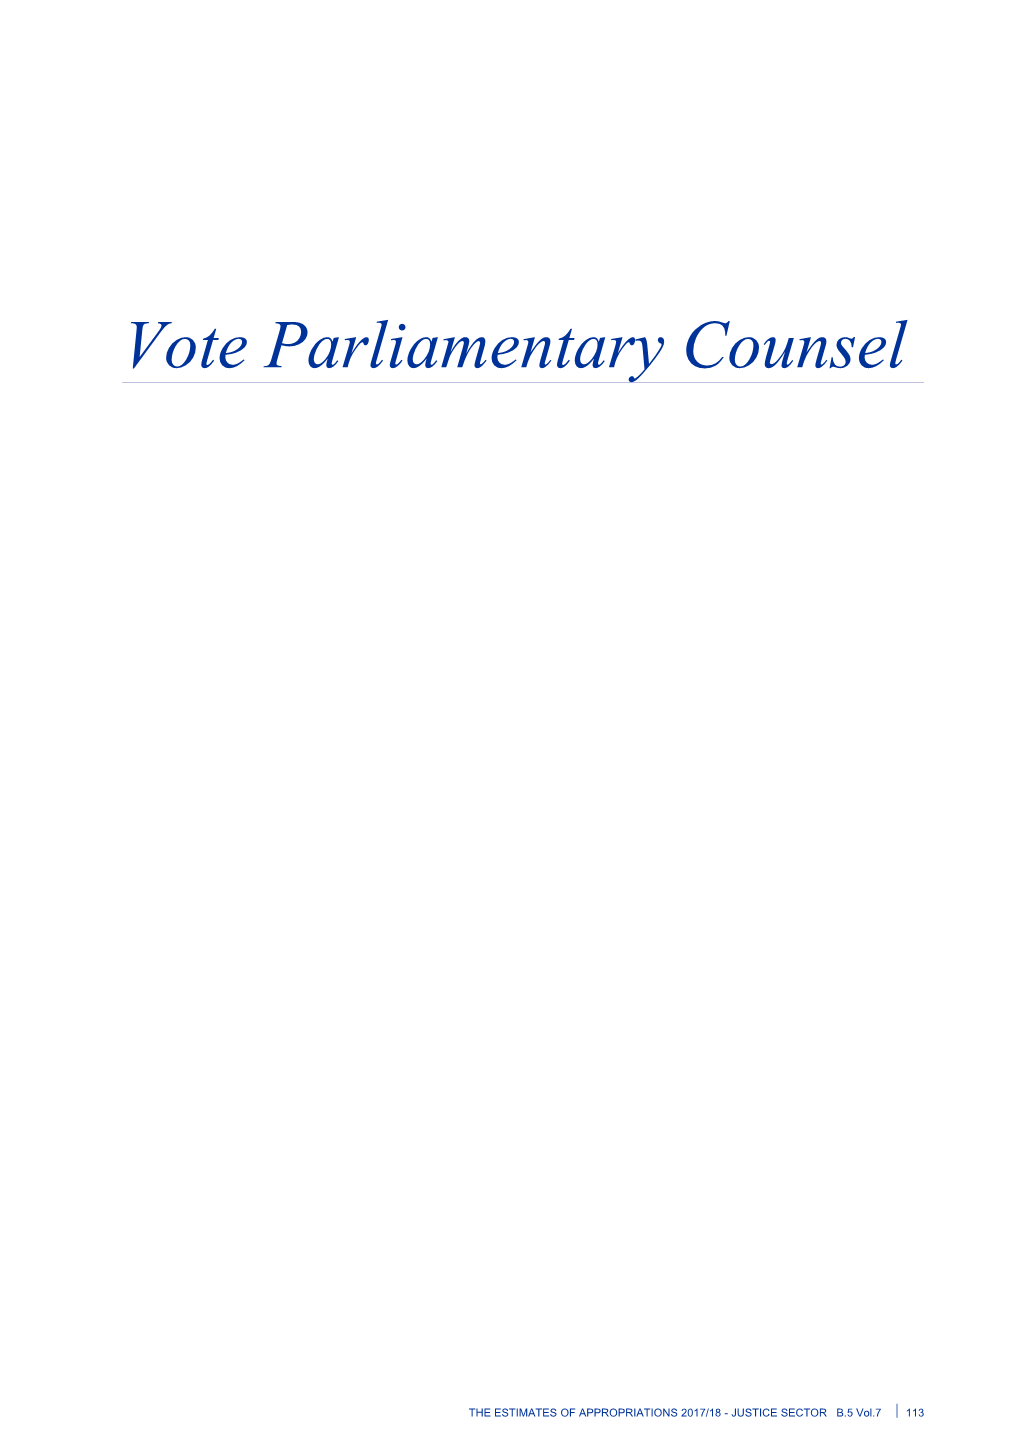 Vote Parliamentary Counsel - Vol 7 Justice Sector - the Estimates of Appropriations 2017/18